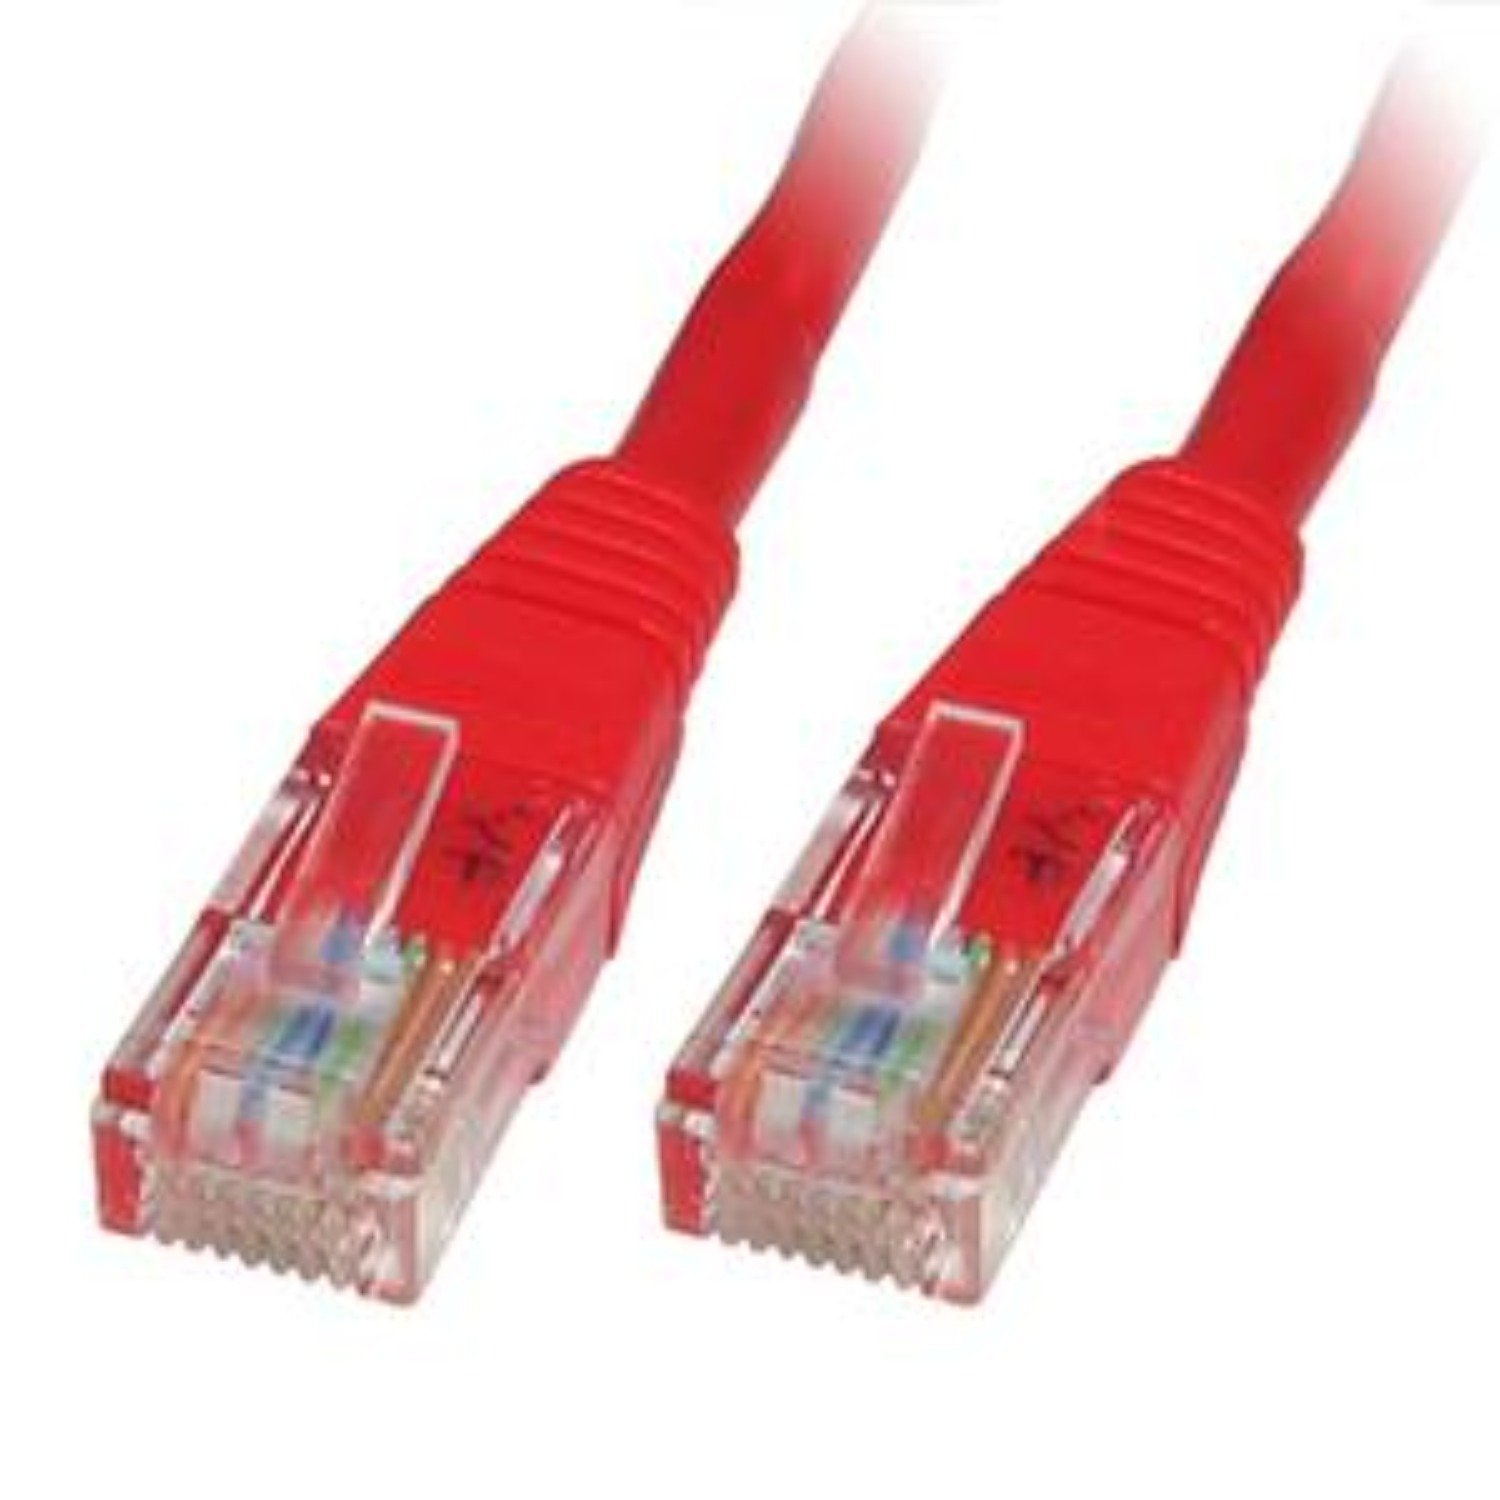 ethernet cable 10m cat6 in red colour